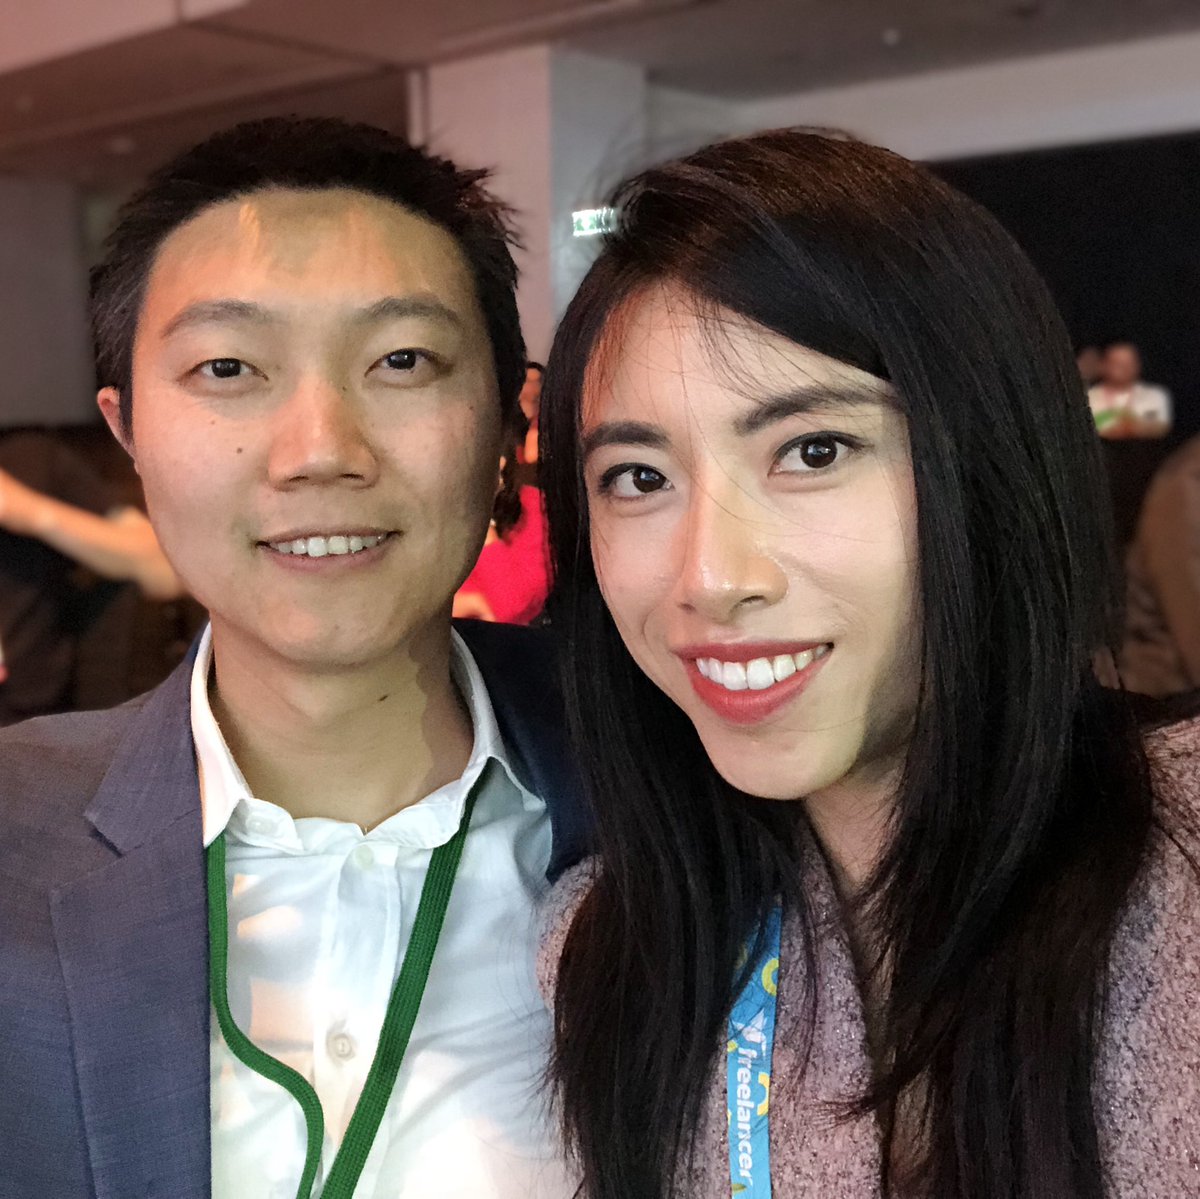 Thanks for having @peterxing from  @KPMG and @transhumanismAU speak at @StartConHQ! There’s digital passes if you missed Australia’s biggest startup event. #innovation #ai #artificialintelligence #machinelearning #datascience #startups #startcon #startcon2018 #salesforce #twilio